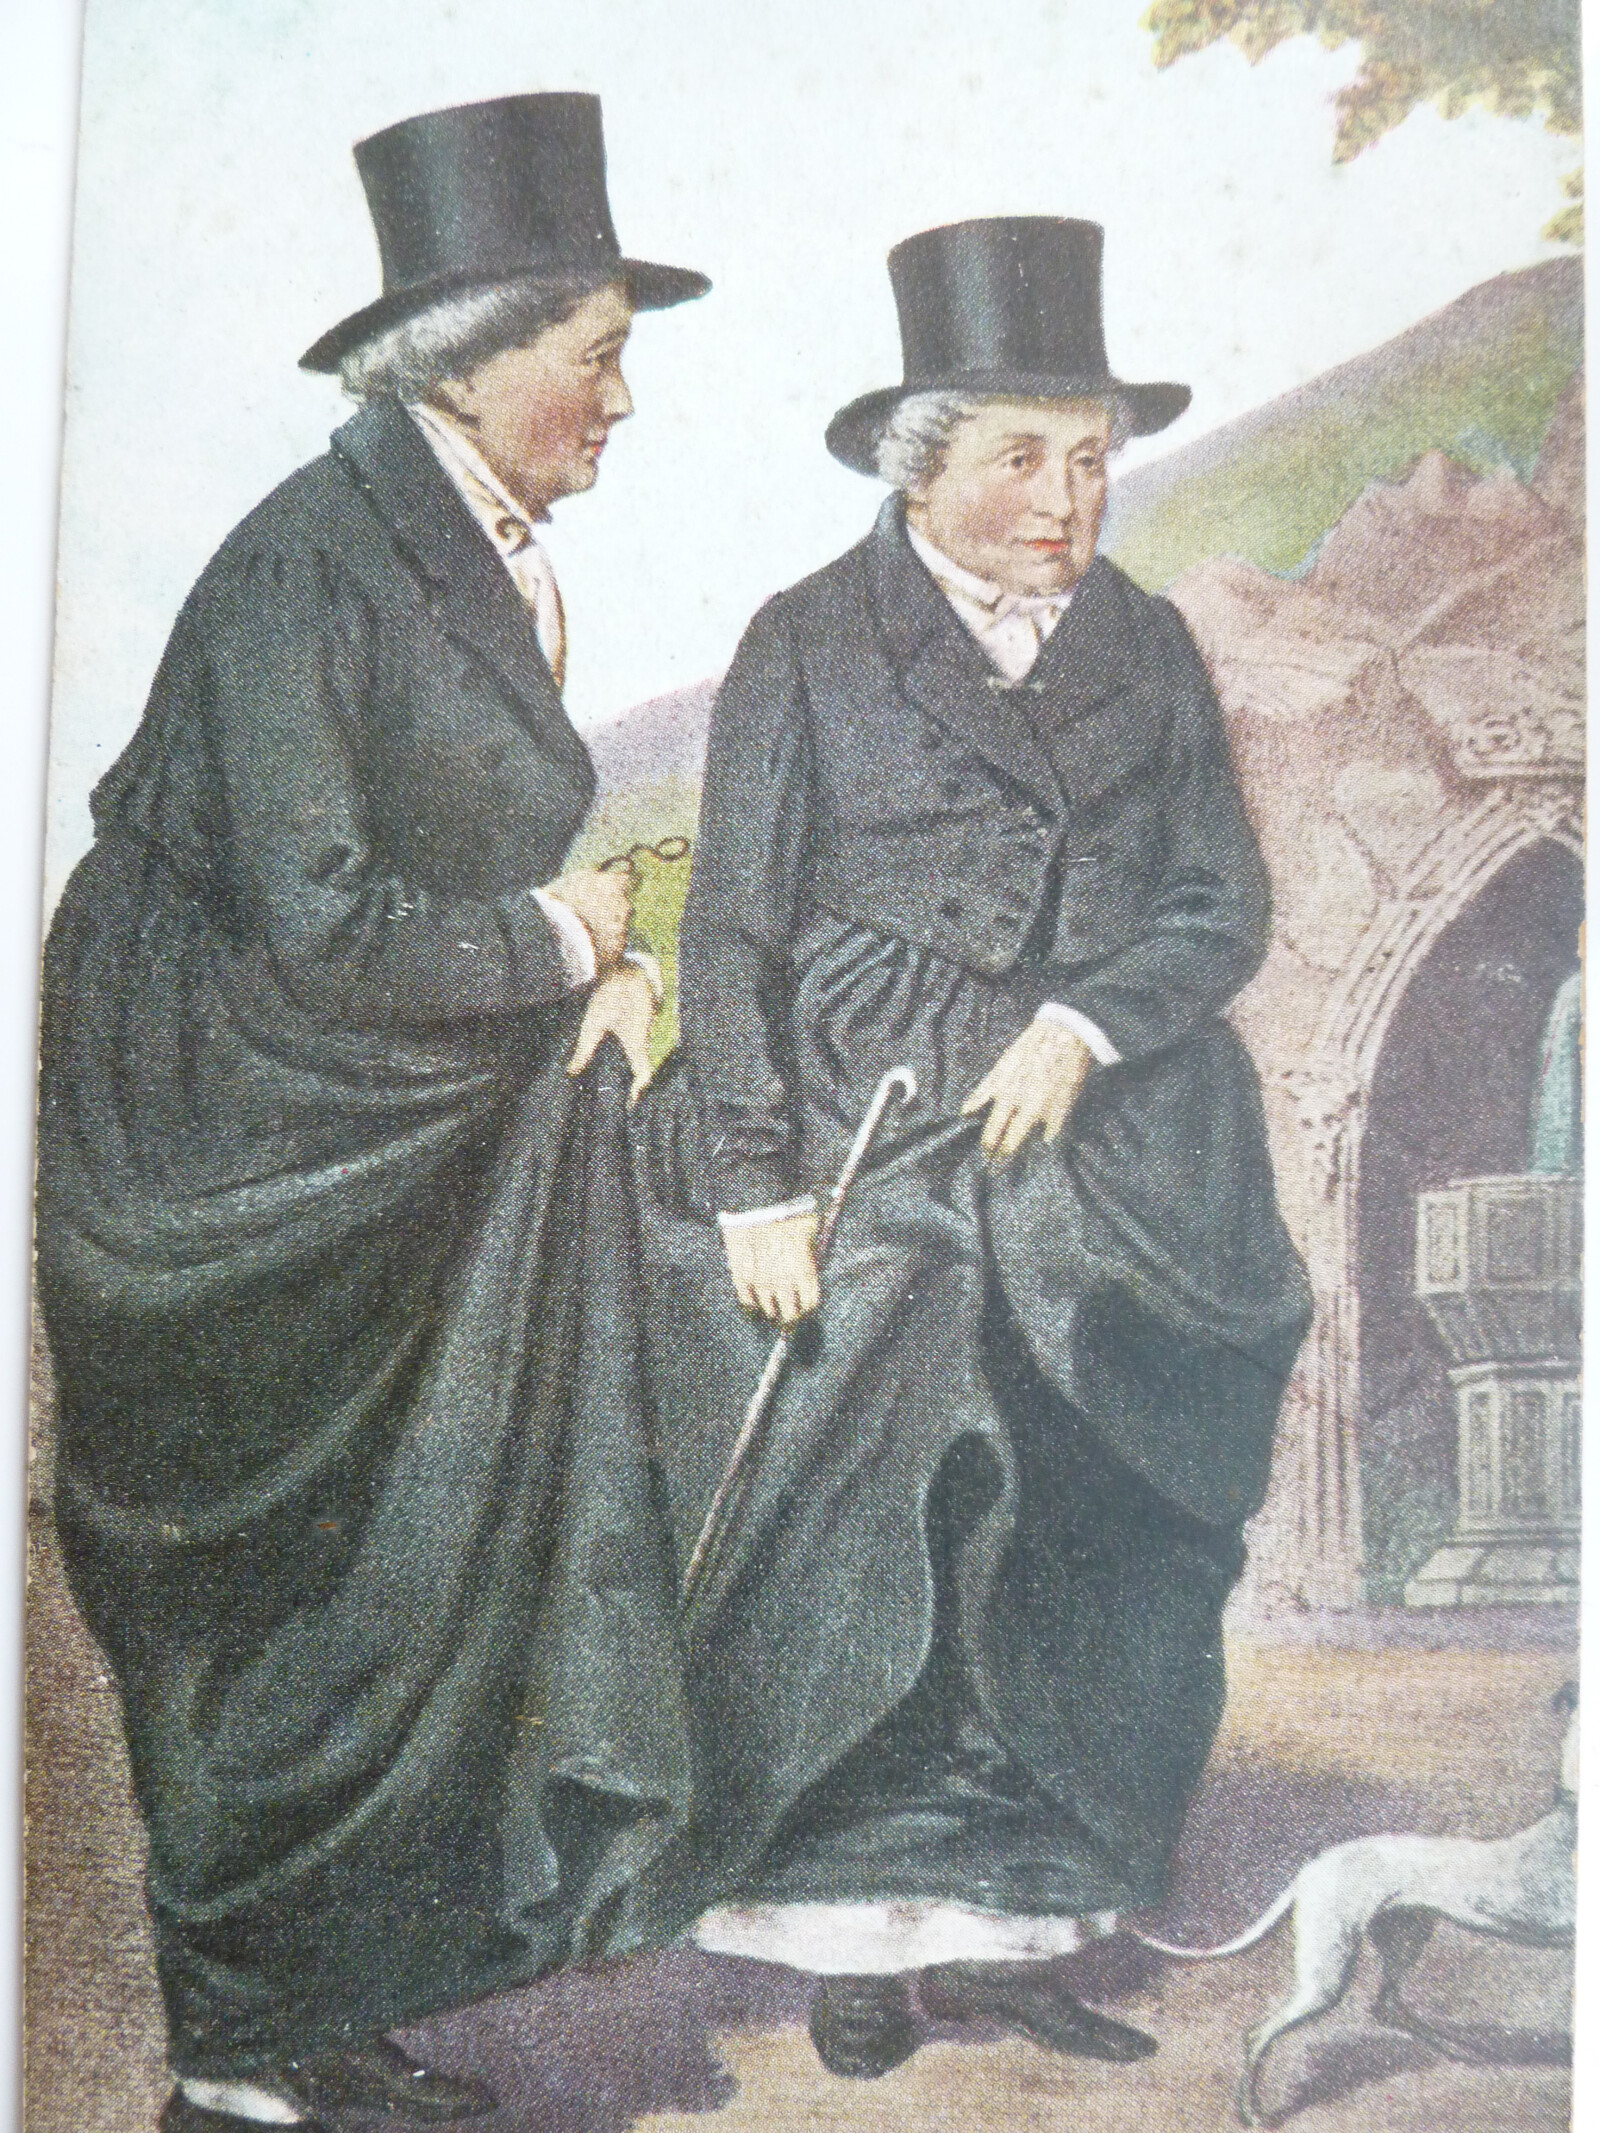 The 'Lynch' portrait of Lady Eleanor Butler and Sarah Ponsonby, pirated from the earlier 'Library' portrait and distributed on a mass scale. (c) Norena Shopland